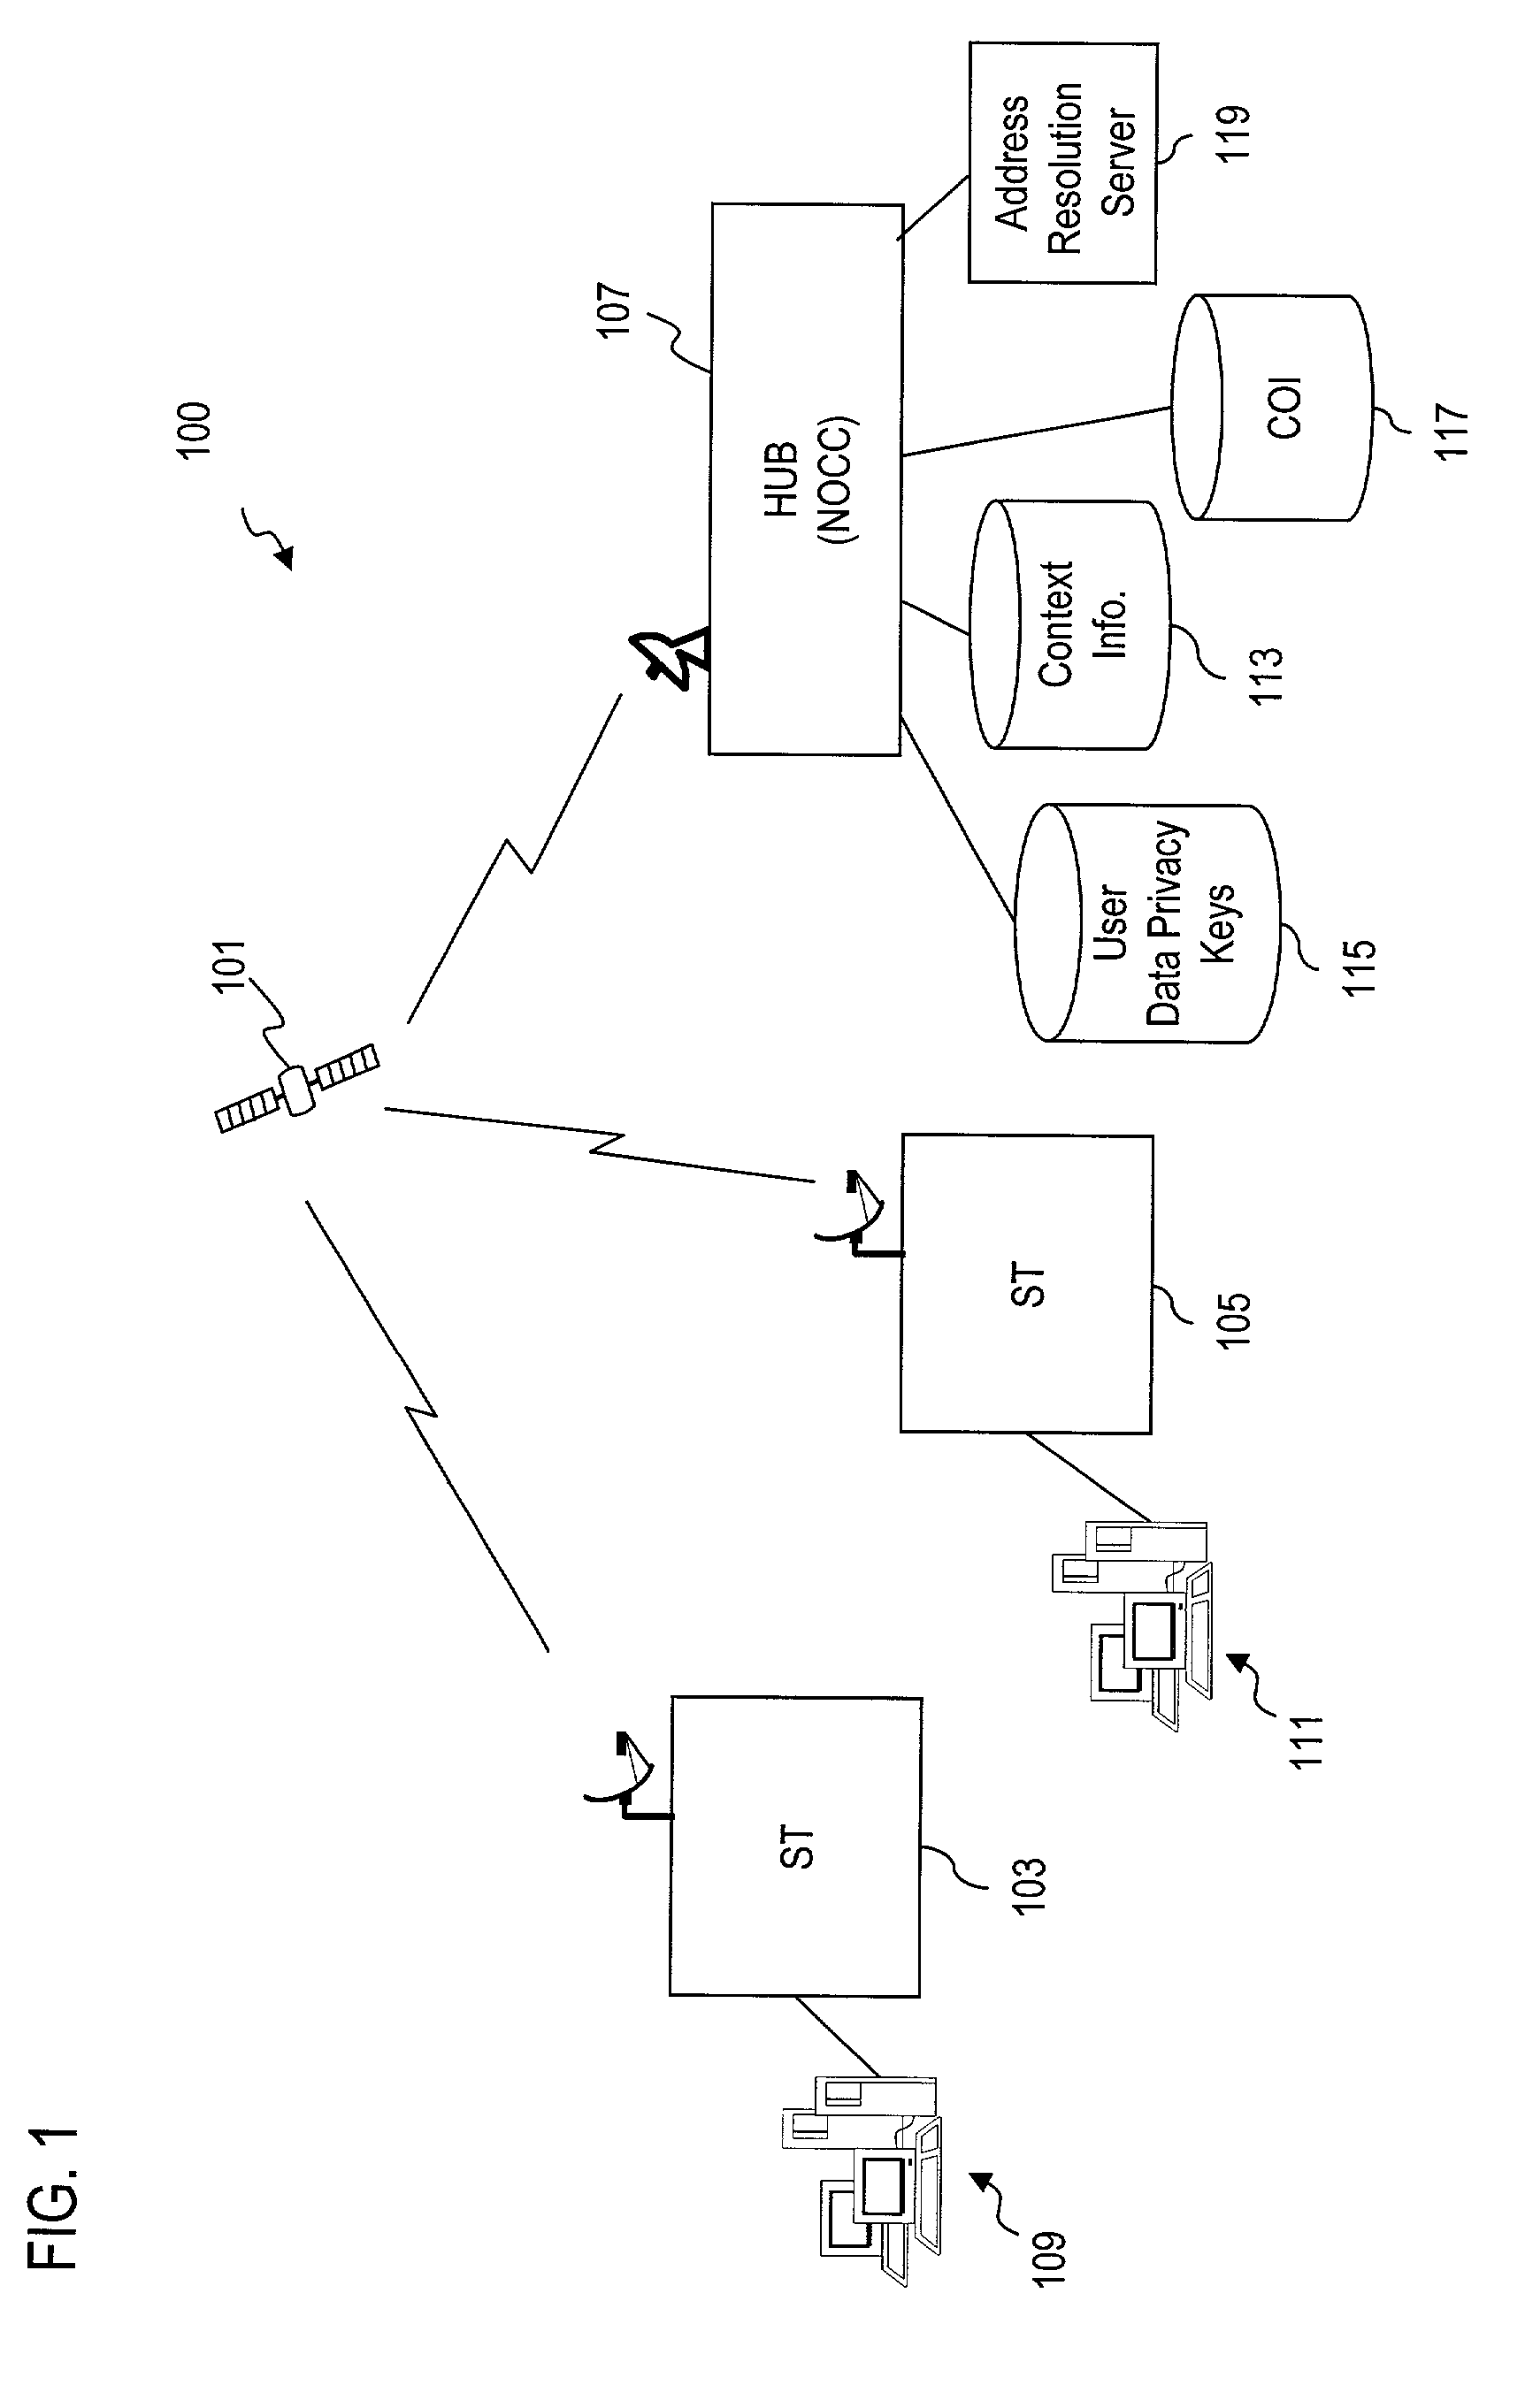 Method and system for centrally exchanging terminal information over a meshed network